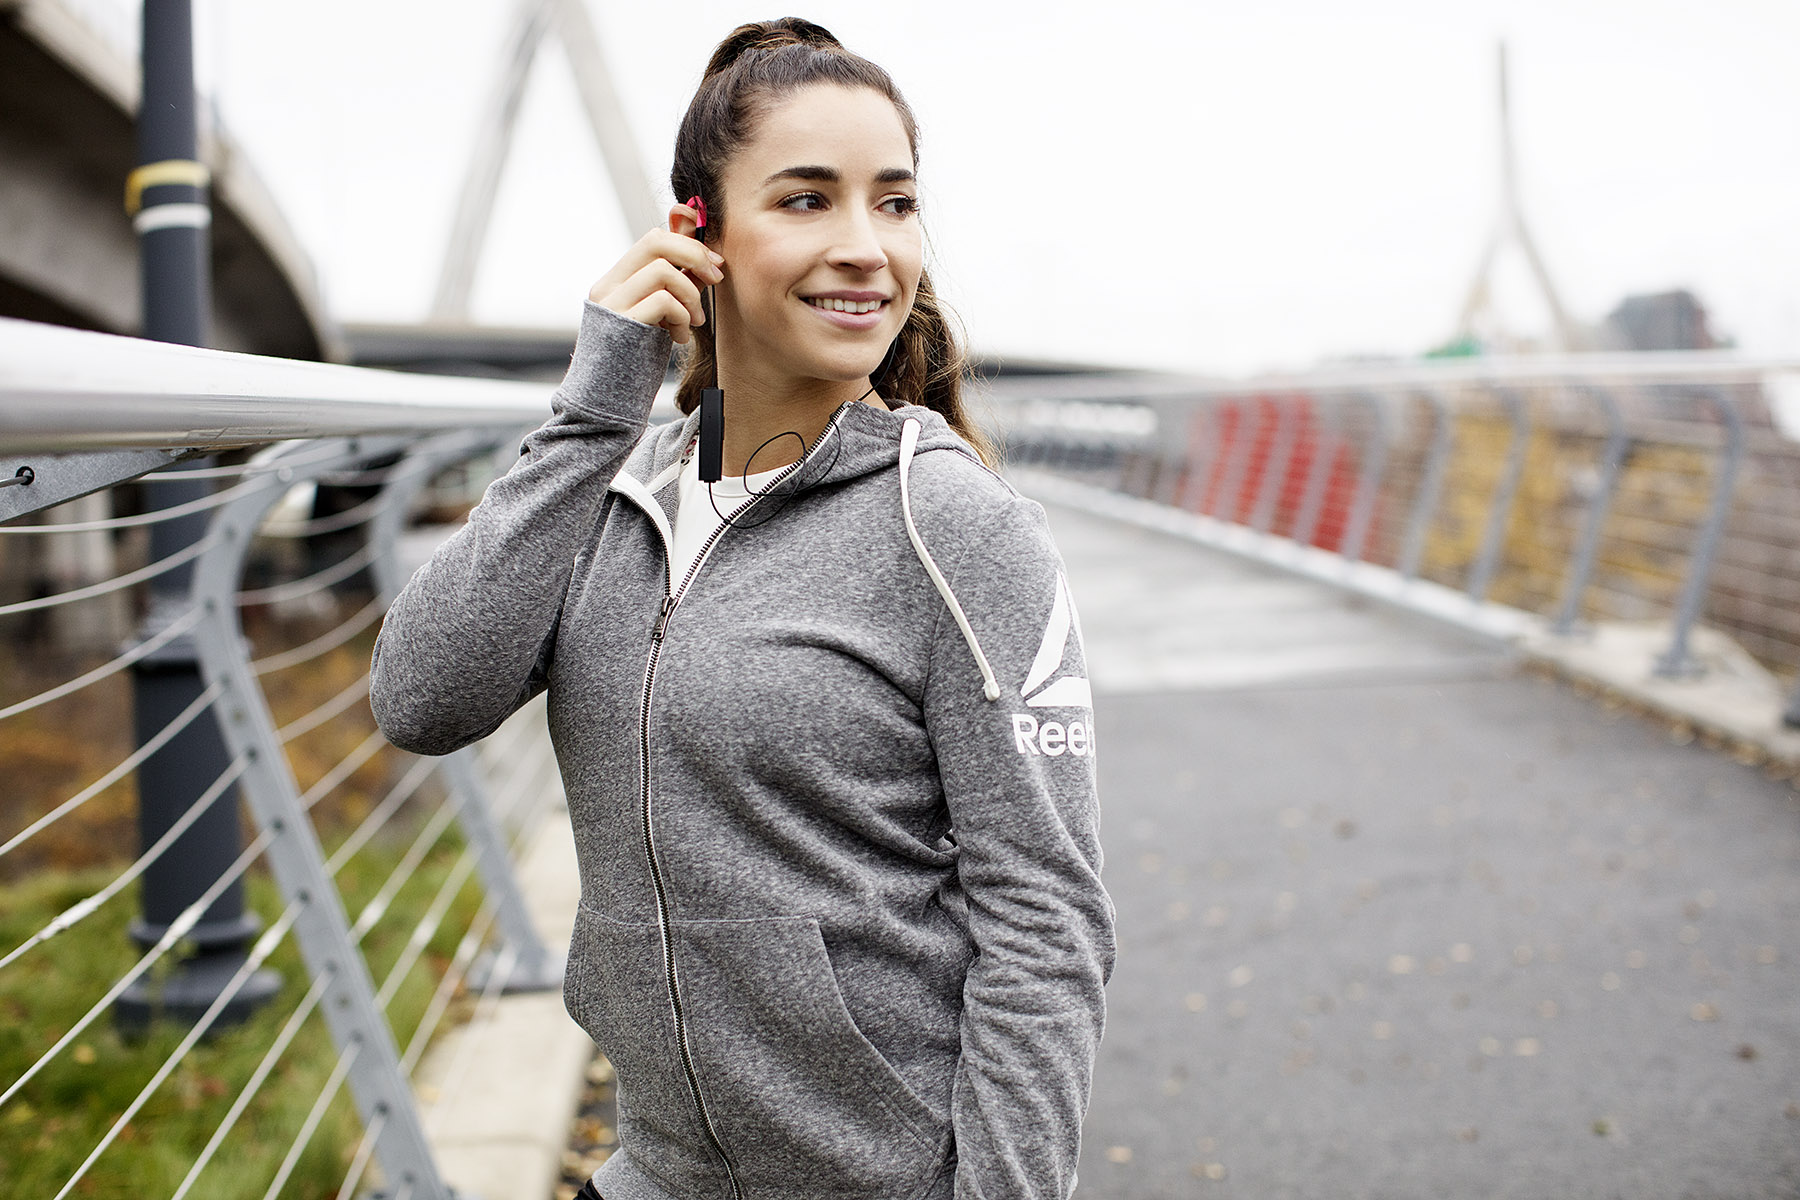 Aly Raisman for Playtex Sport by Boston based commercial lifestyle photographer Brian Nevins